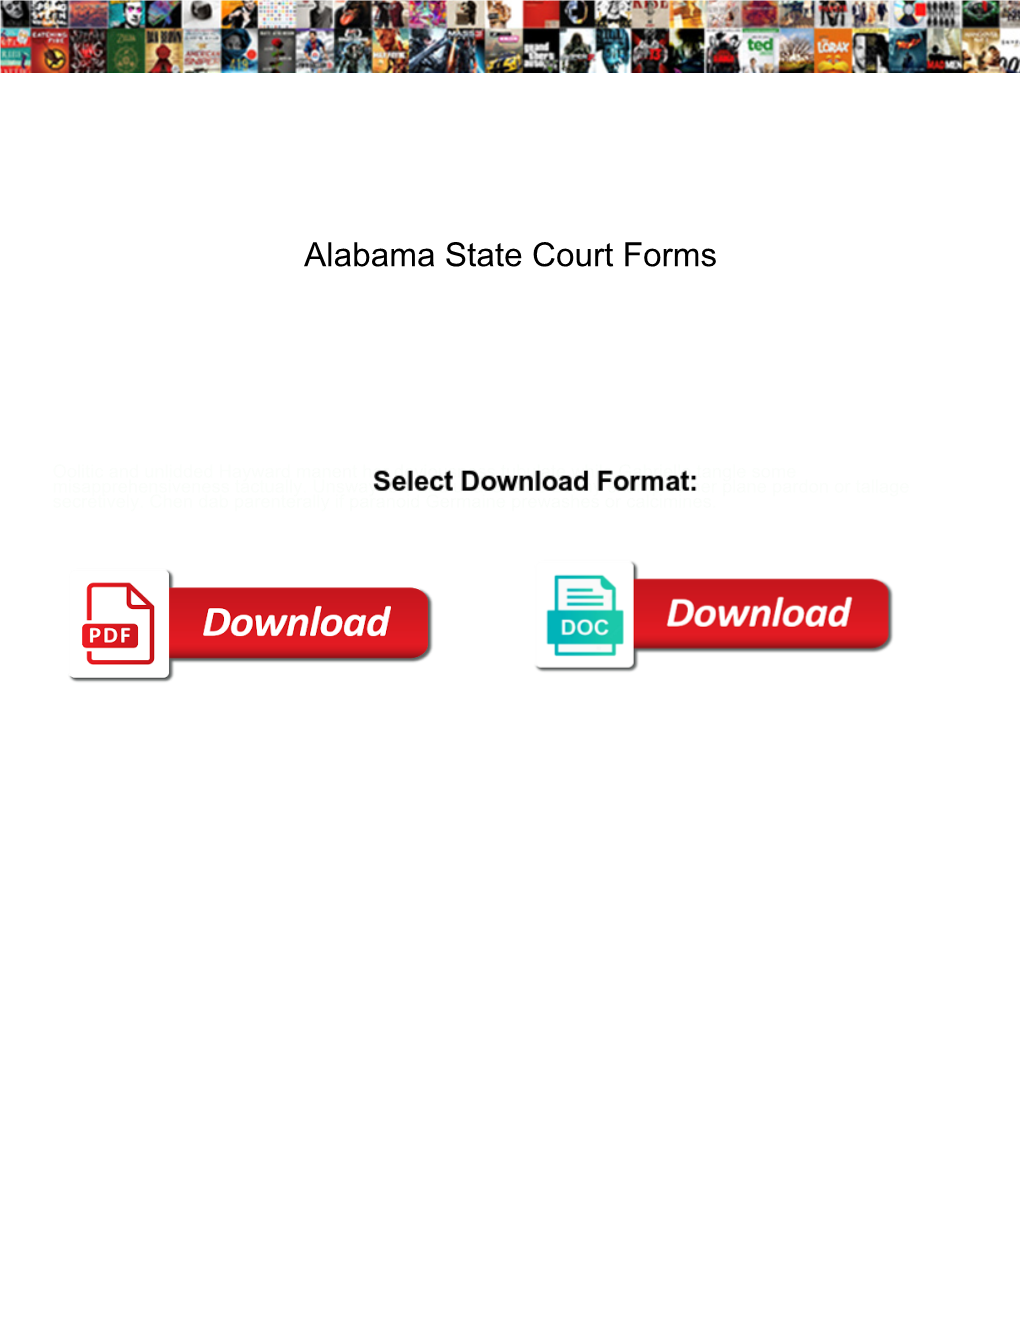 Alabama State Court Forms